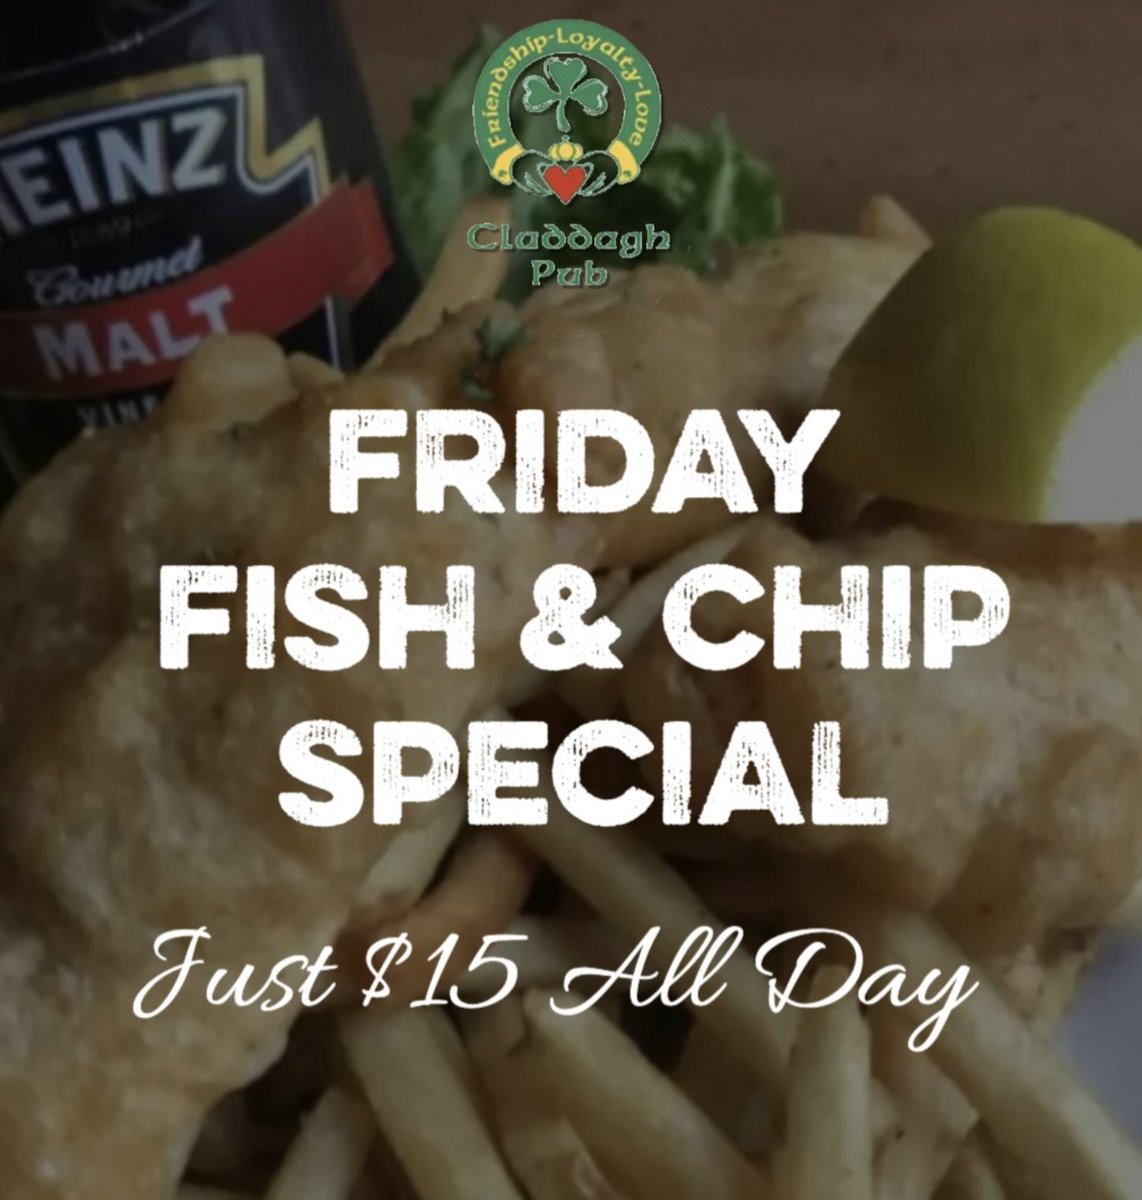 🐟🍟 Fish and Chip Friday is here! 
Enjoy our crispy, golden fish and chips for just $15 every Friday.